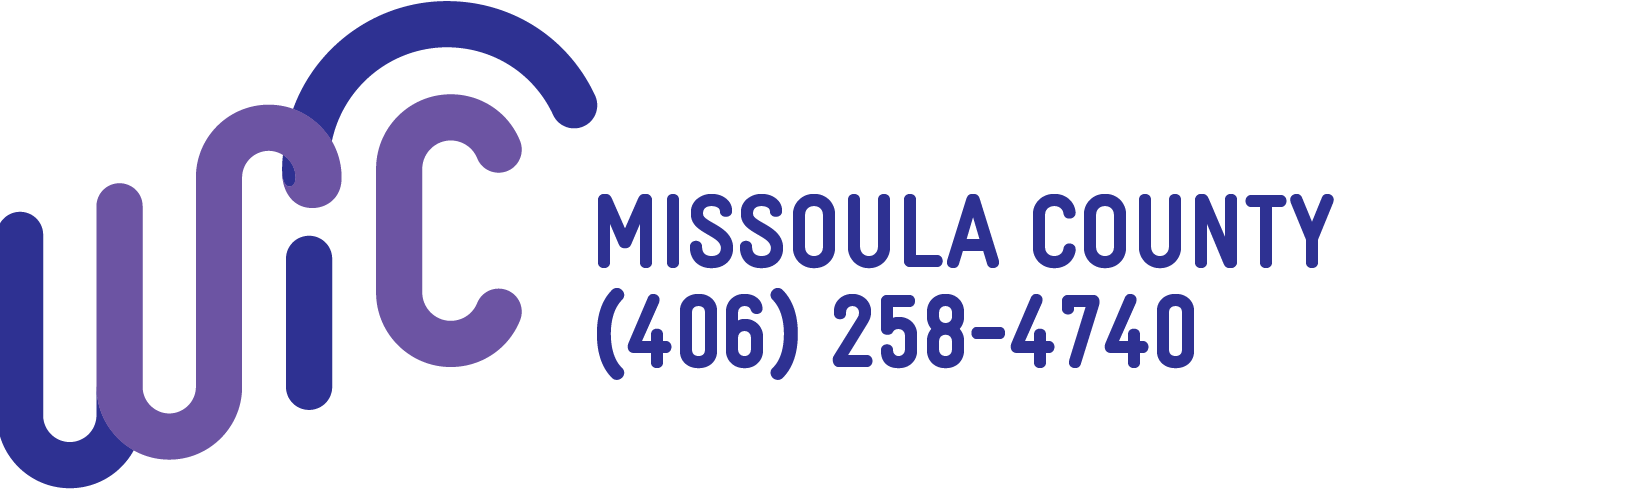 Missoula WIC Logo with Phone Number